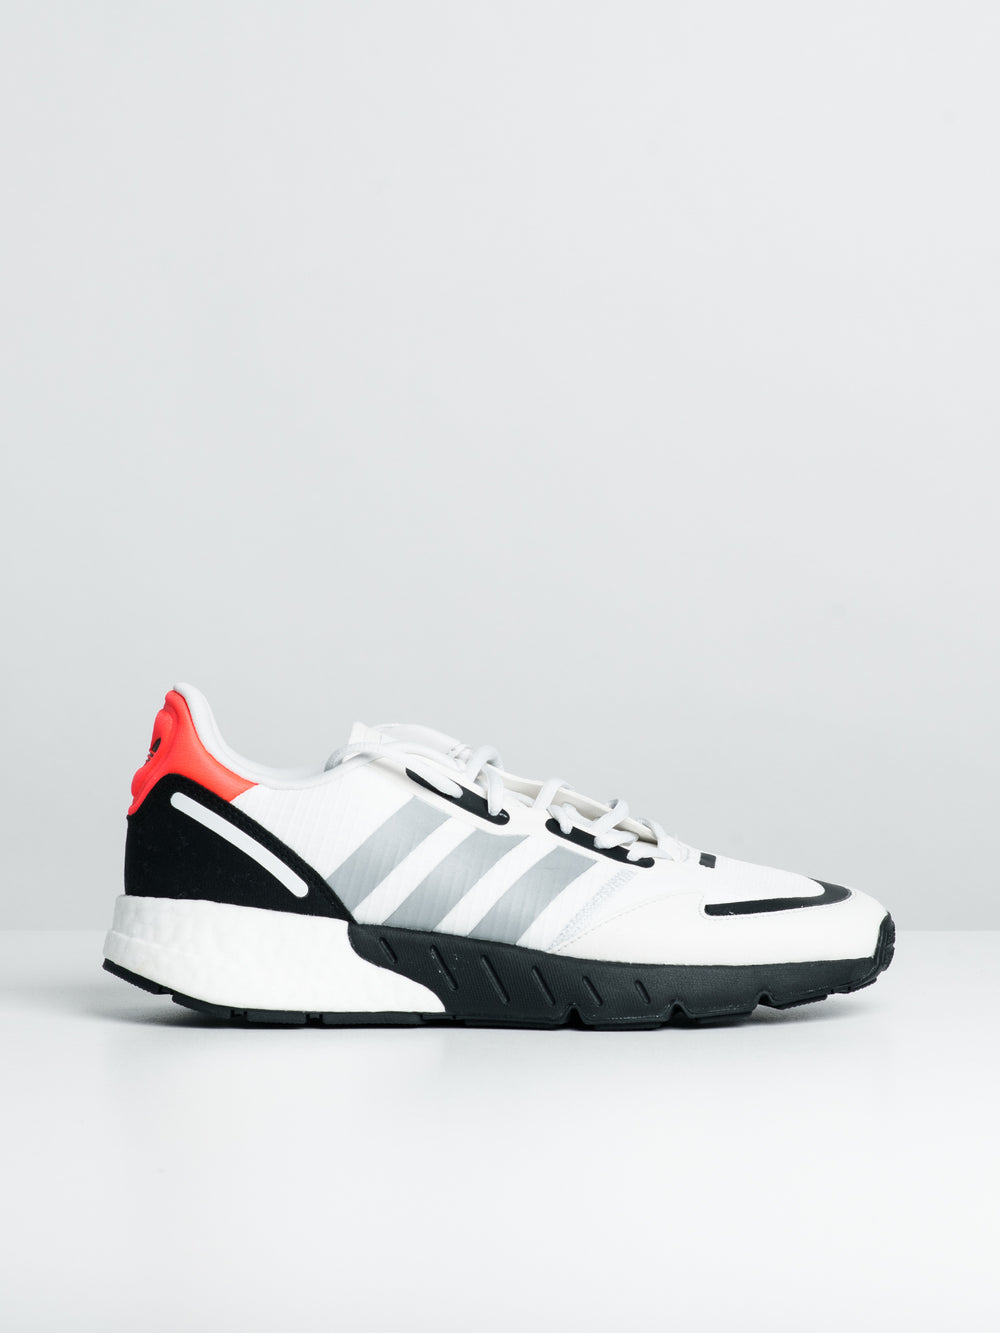 MENS ADIDAS ZX 1K BOOST SNEAKERS - WHITE/BLACK - CLEARANCE